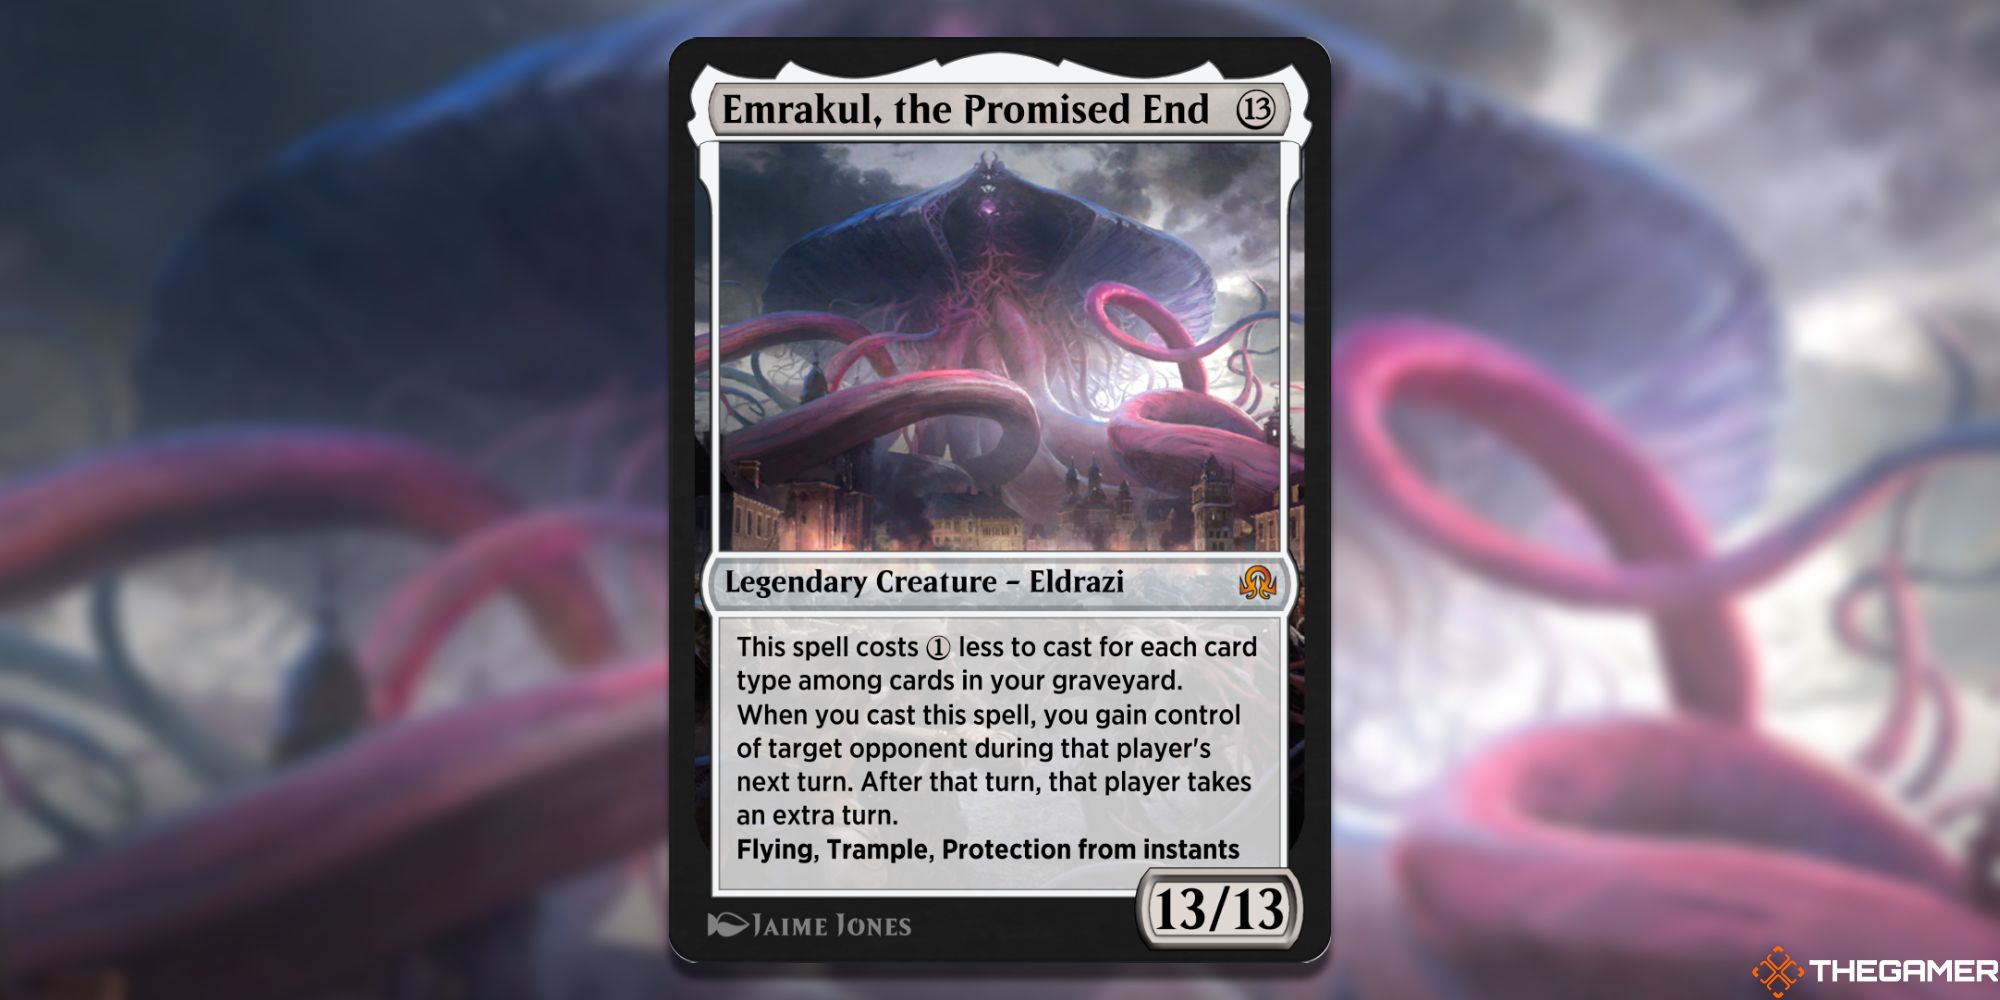 Image of Emrakul the Promised End card from Magic: The Gathering (art by Jamie Jones)